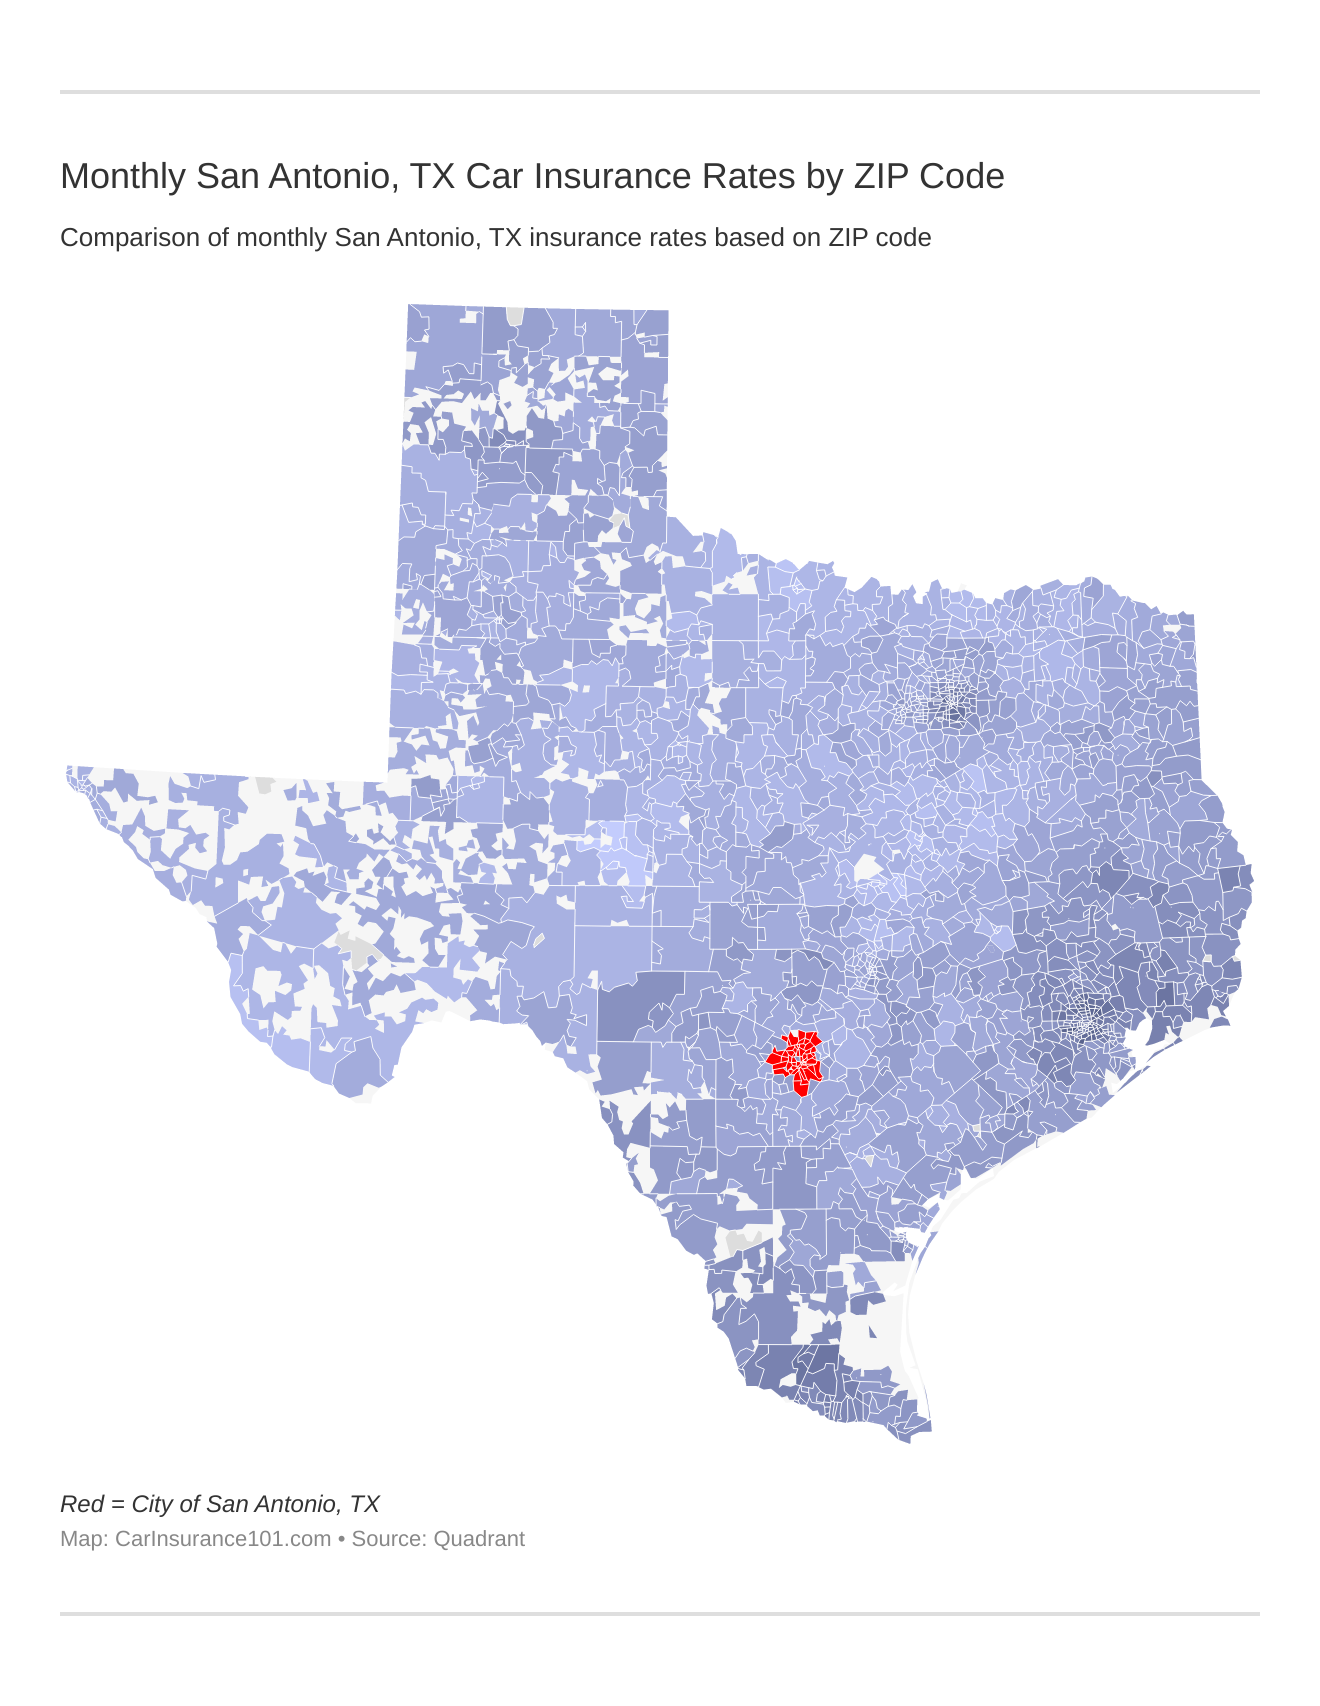 Monthly San Antonio, TX Car Insurance Rates by ZIP Code